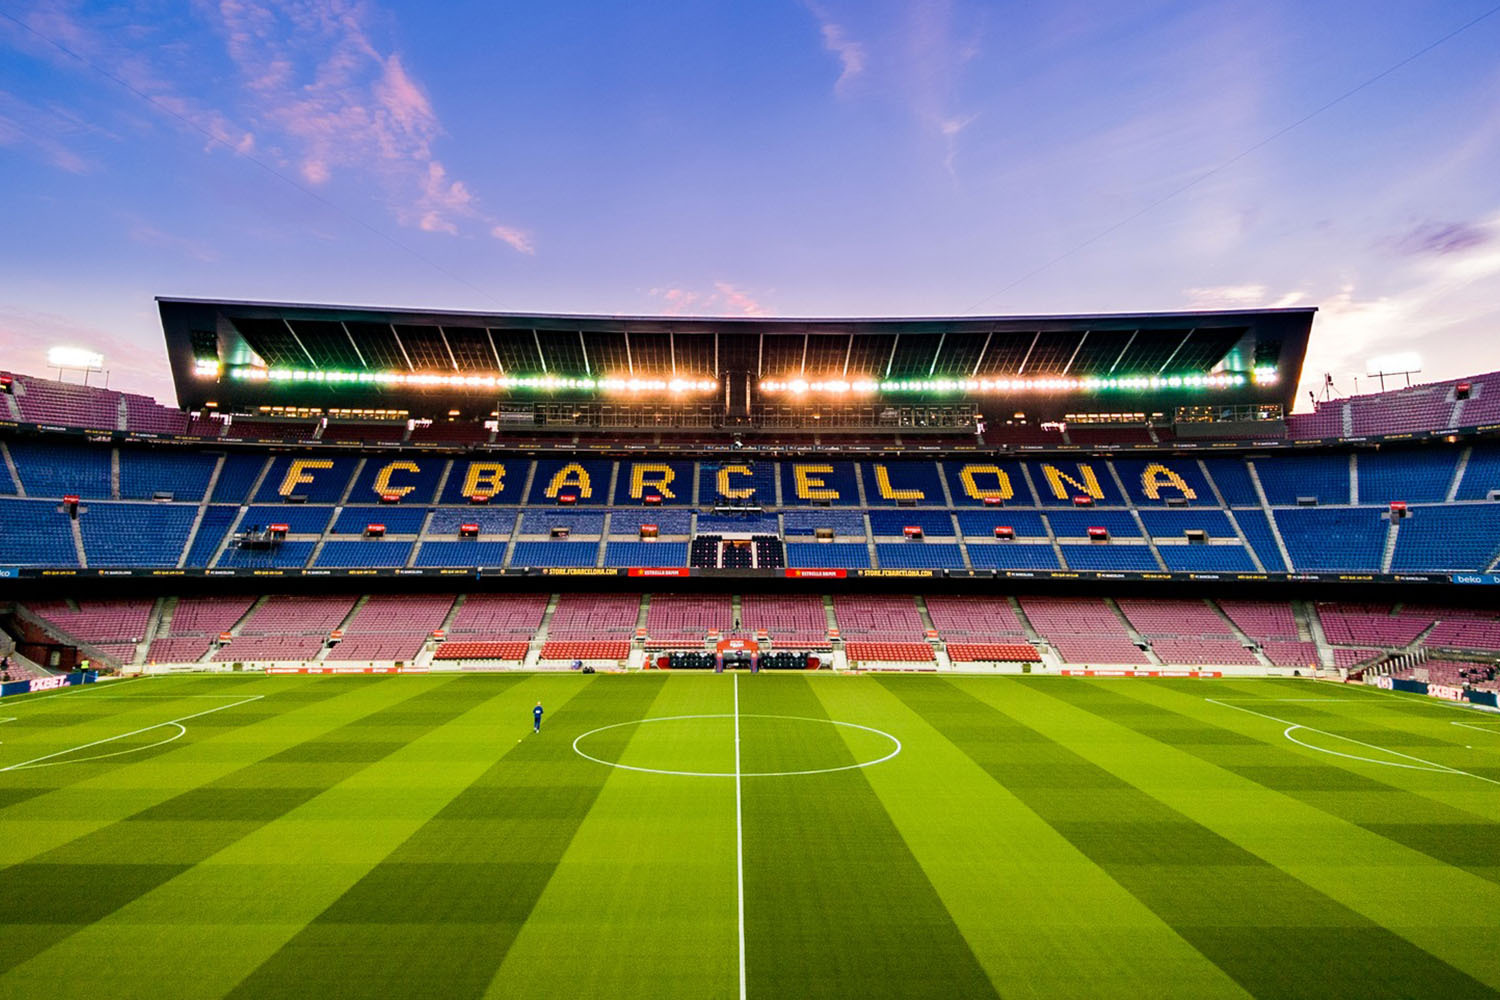 Barcelona Strikes Media Investment Worth Up to $278M